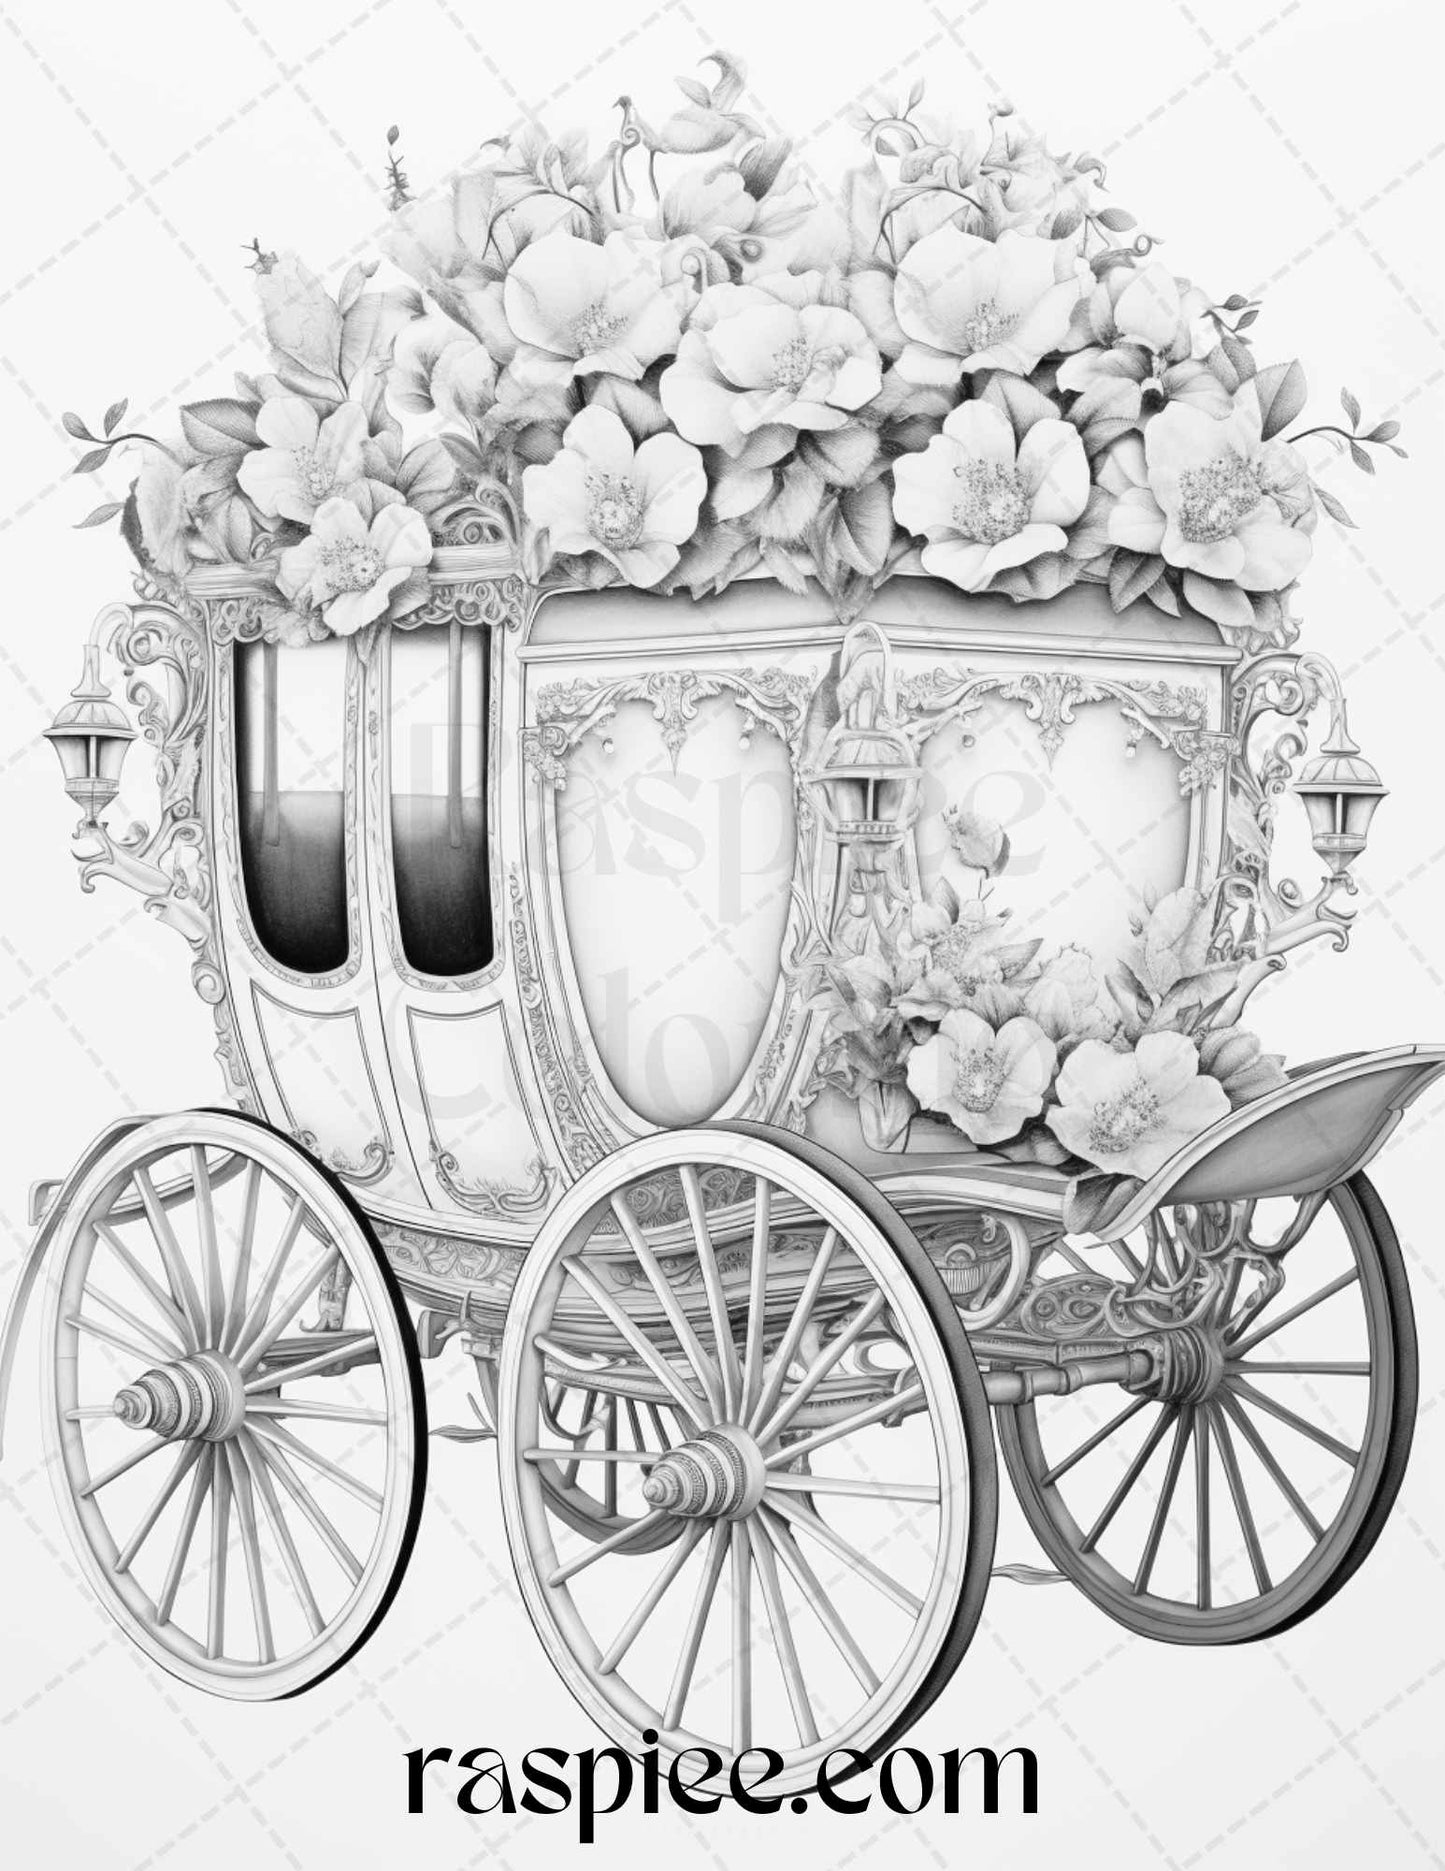 Vintage Flower Carriage Grayscale Coloring Page for Adults, Printable Black and White Coloring Book Illustration, Relaxing Floral Coloring Page Instant Download, Digital Printable Antique Flower Carriage Design, High-Quality PDF Printable Coloring Sheet